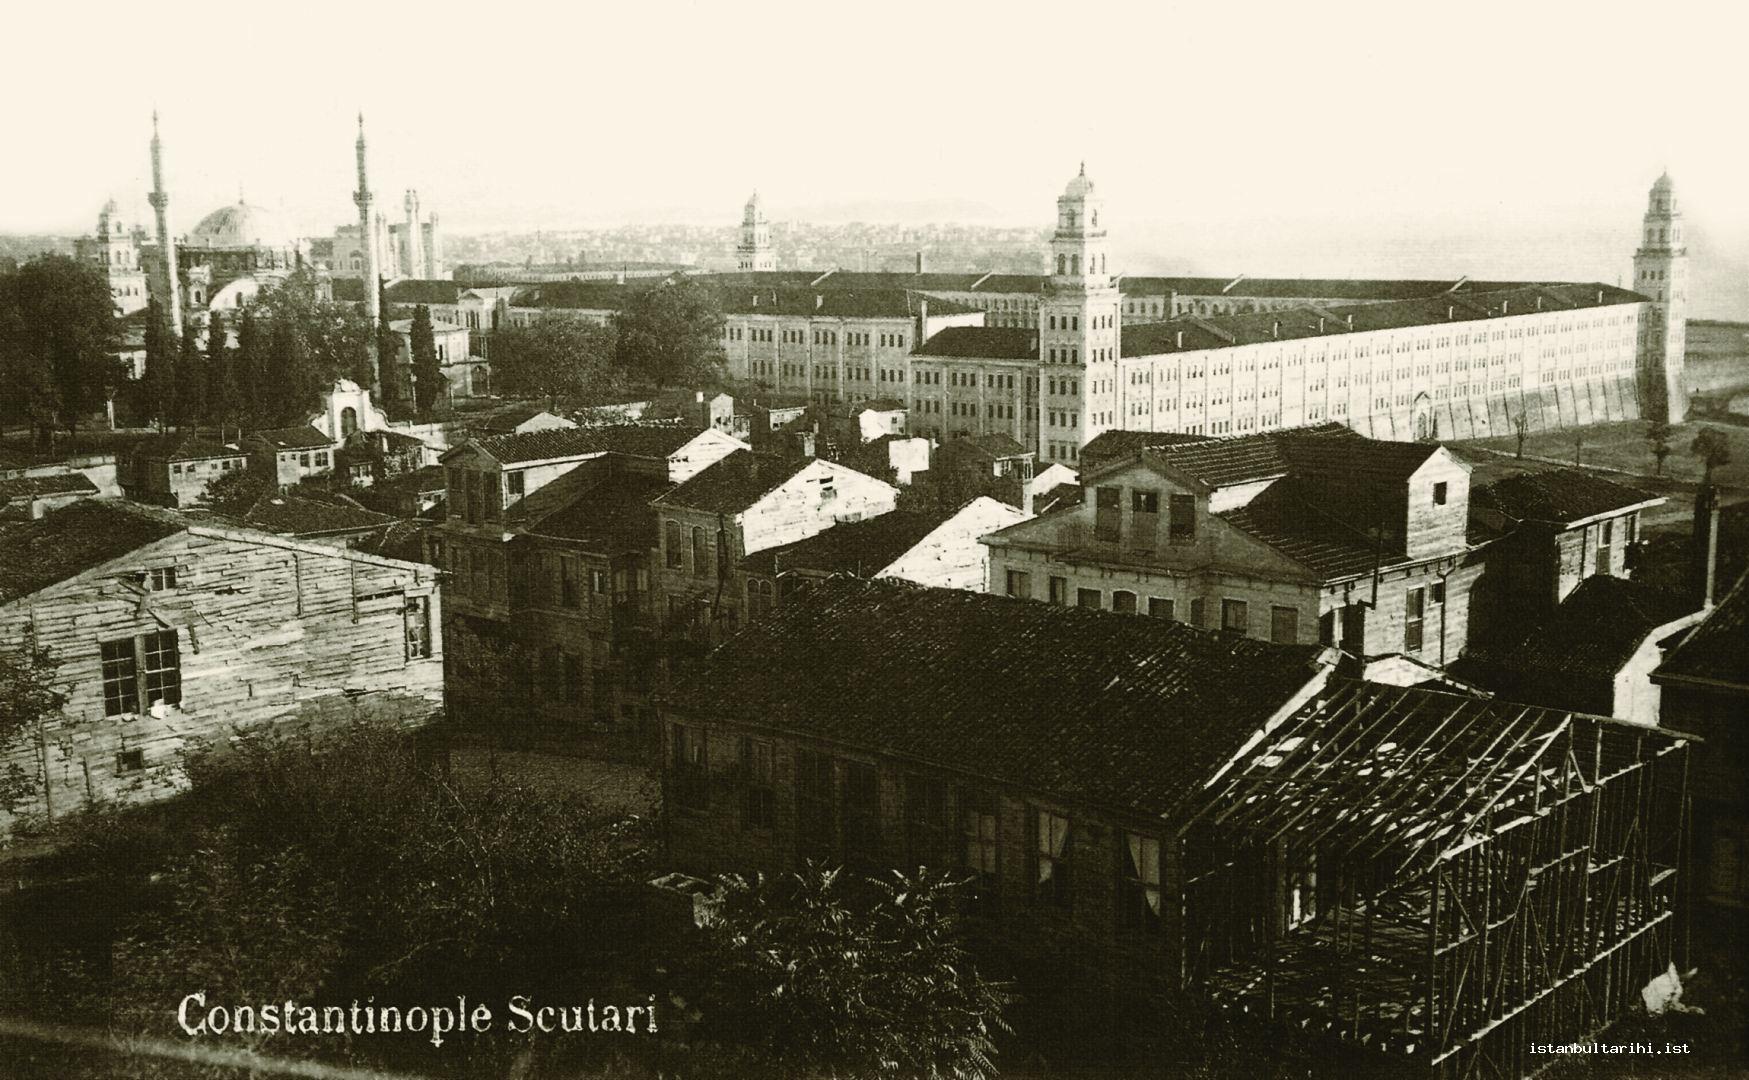 17- The new building of Selimiye Barracks built by Sultan Mahmud II near which there were Üsküdar Publishing House and other New Order (Nizam-ı Cedid) facilities